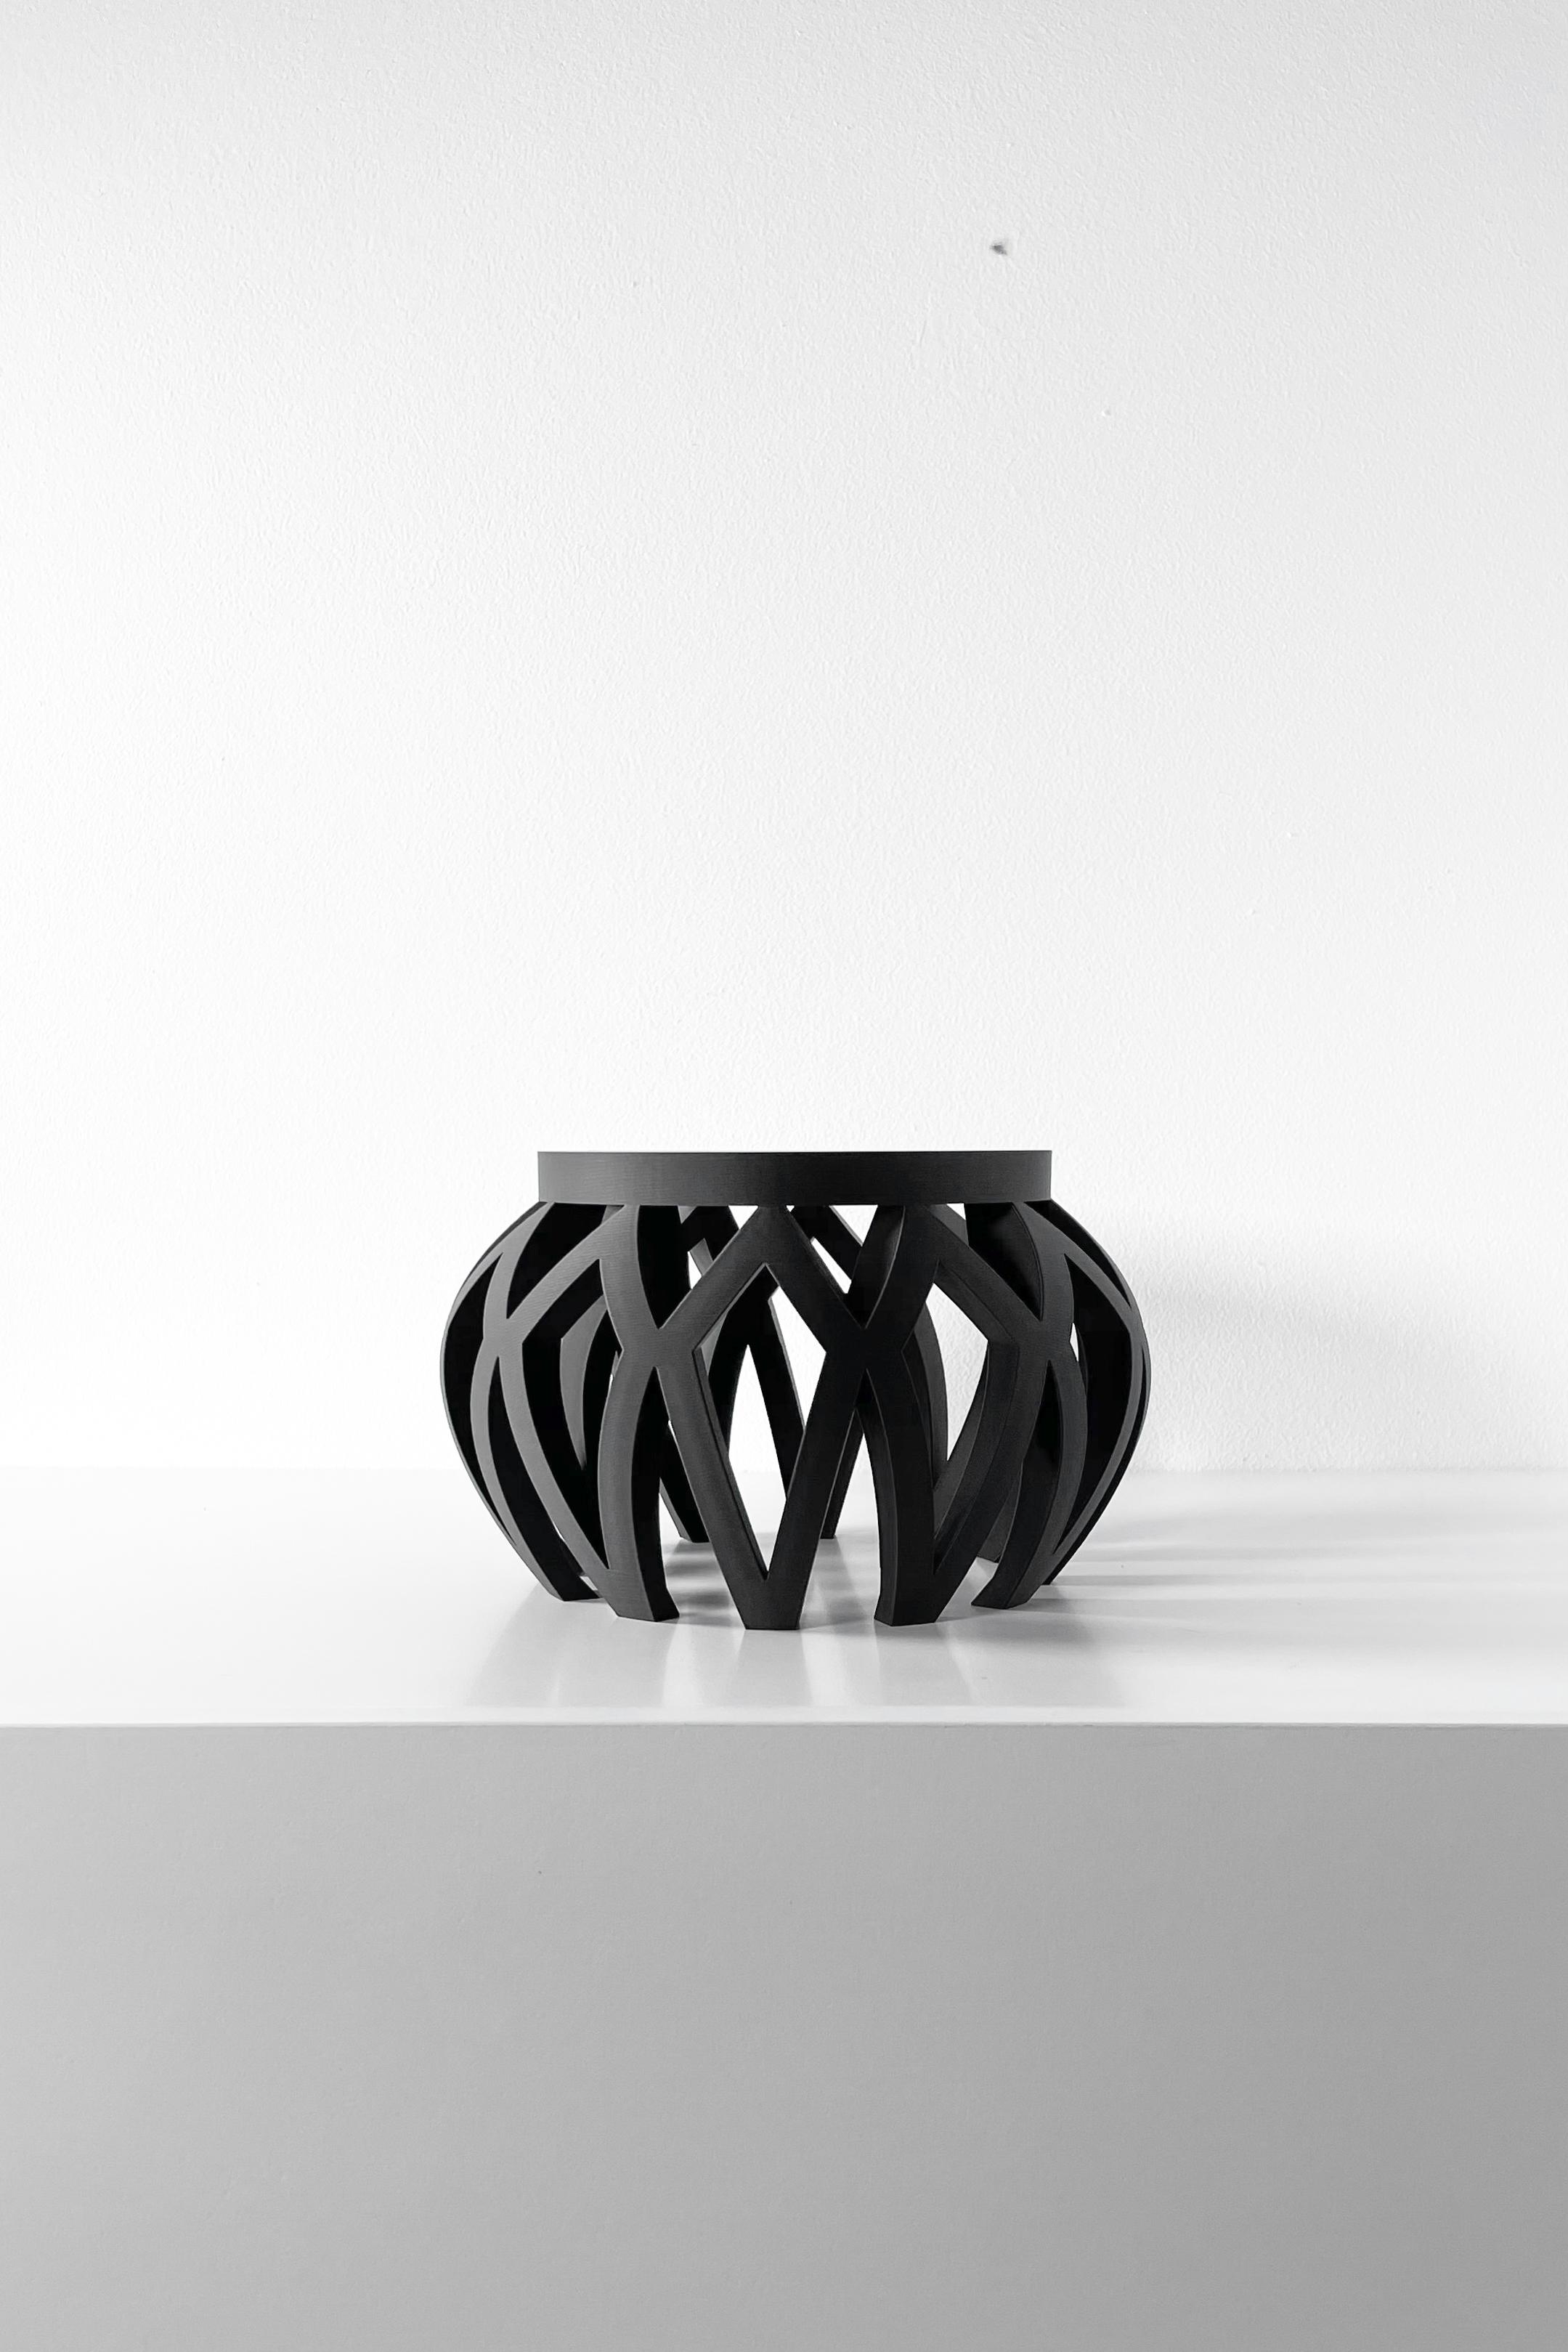 The Orvus Display Stand for Planters and Decor | Modern and Unique Home Decor 3d model